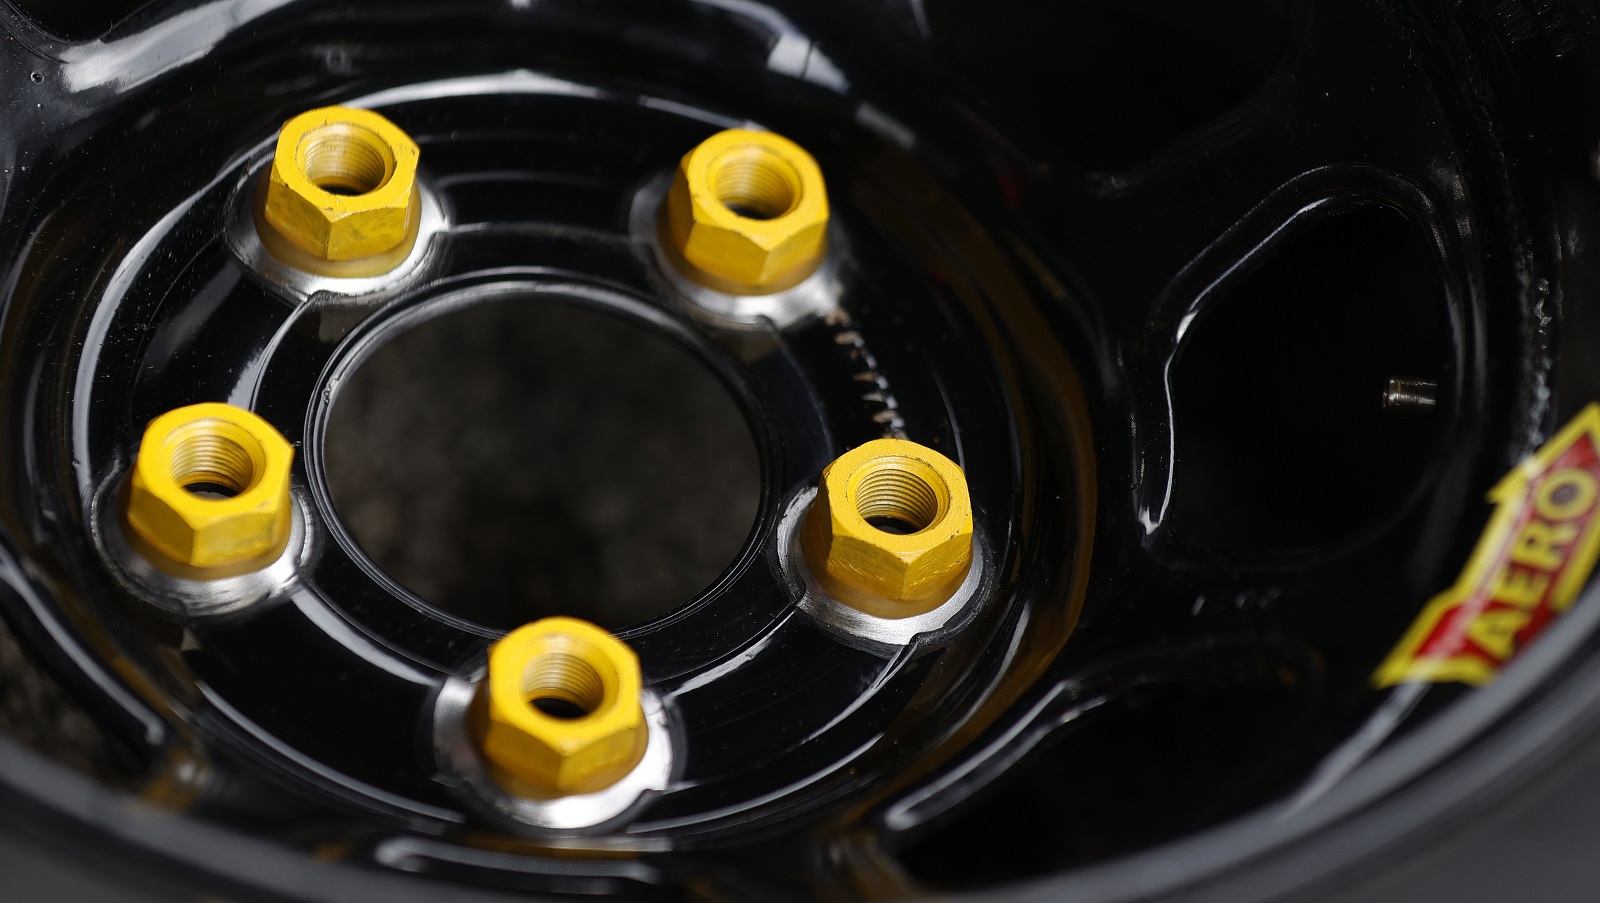 A detail of tire and lug nuts in the 23XI Racing Toyota pit area prior to the 2021 Daytona 500.